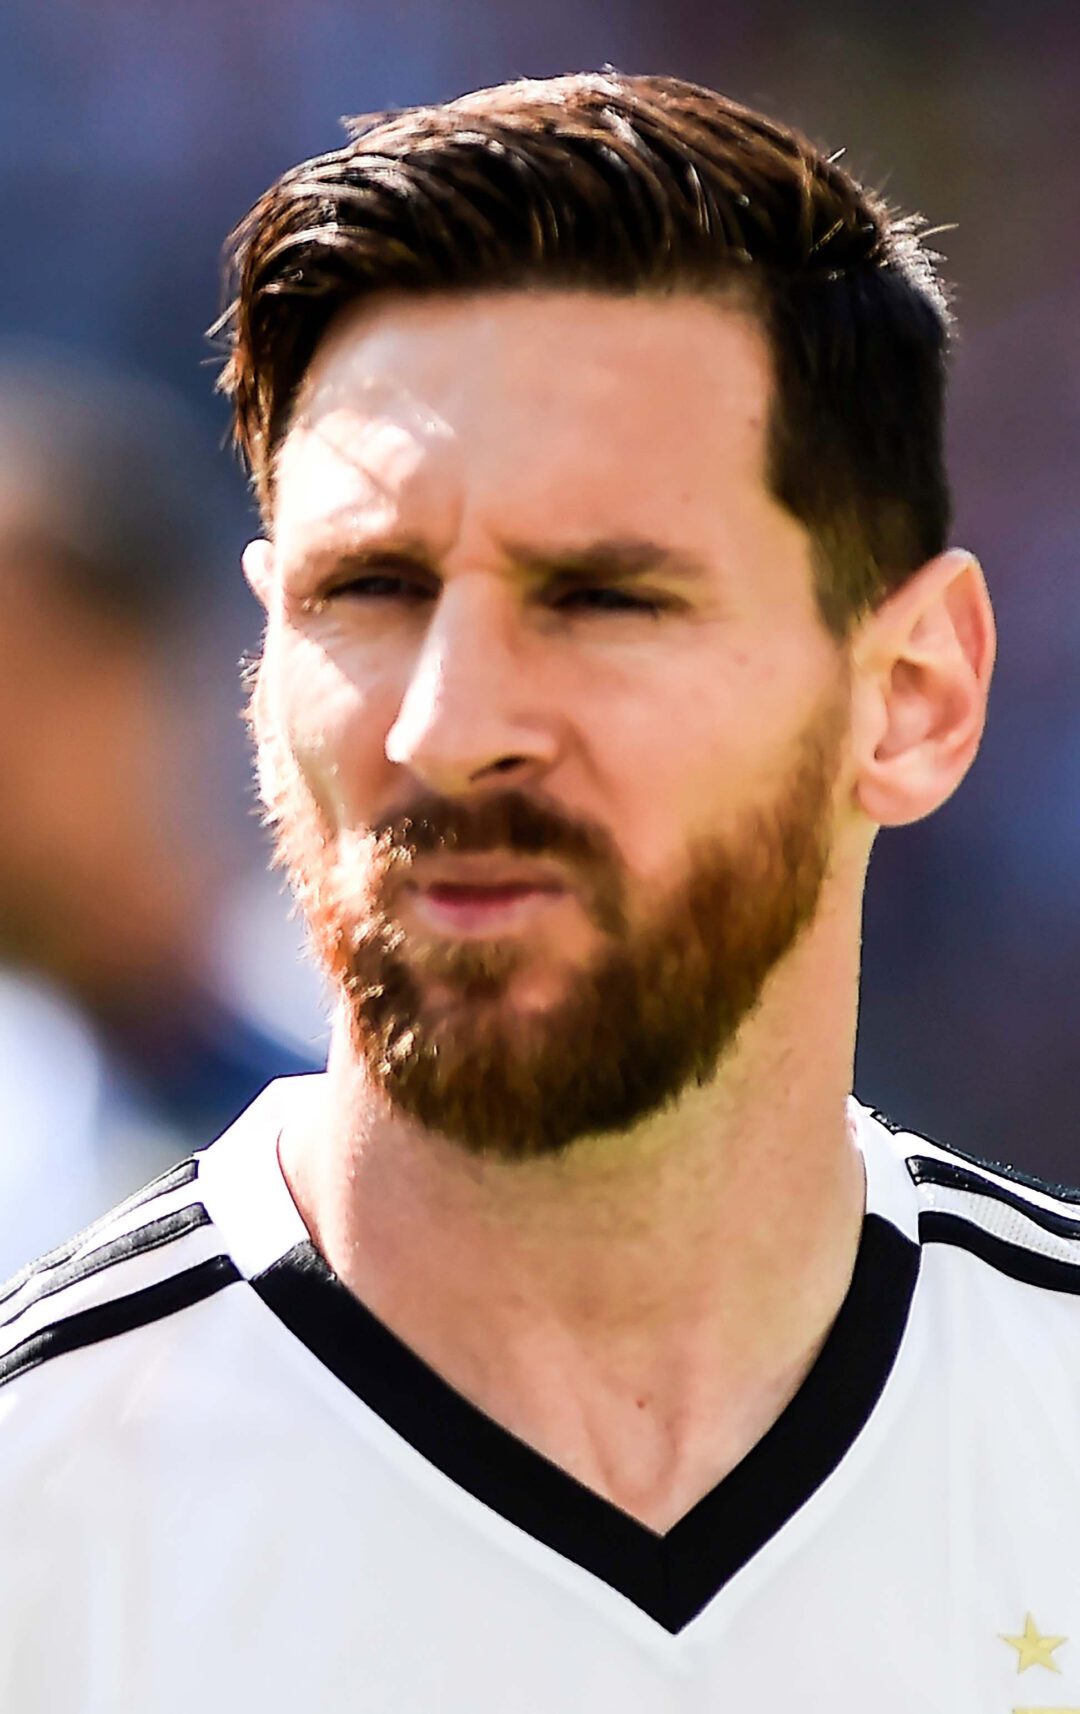 Lionel Messi S Top 10 Most Iconic Hairstyles Haircut Inspiration